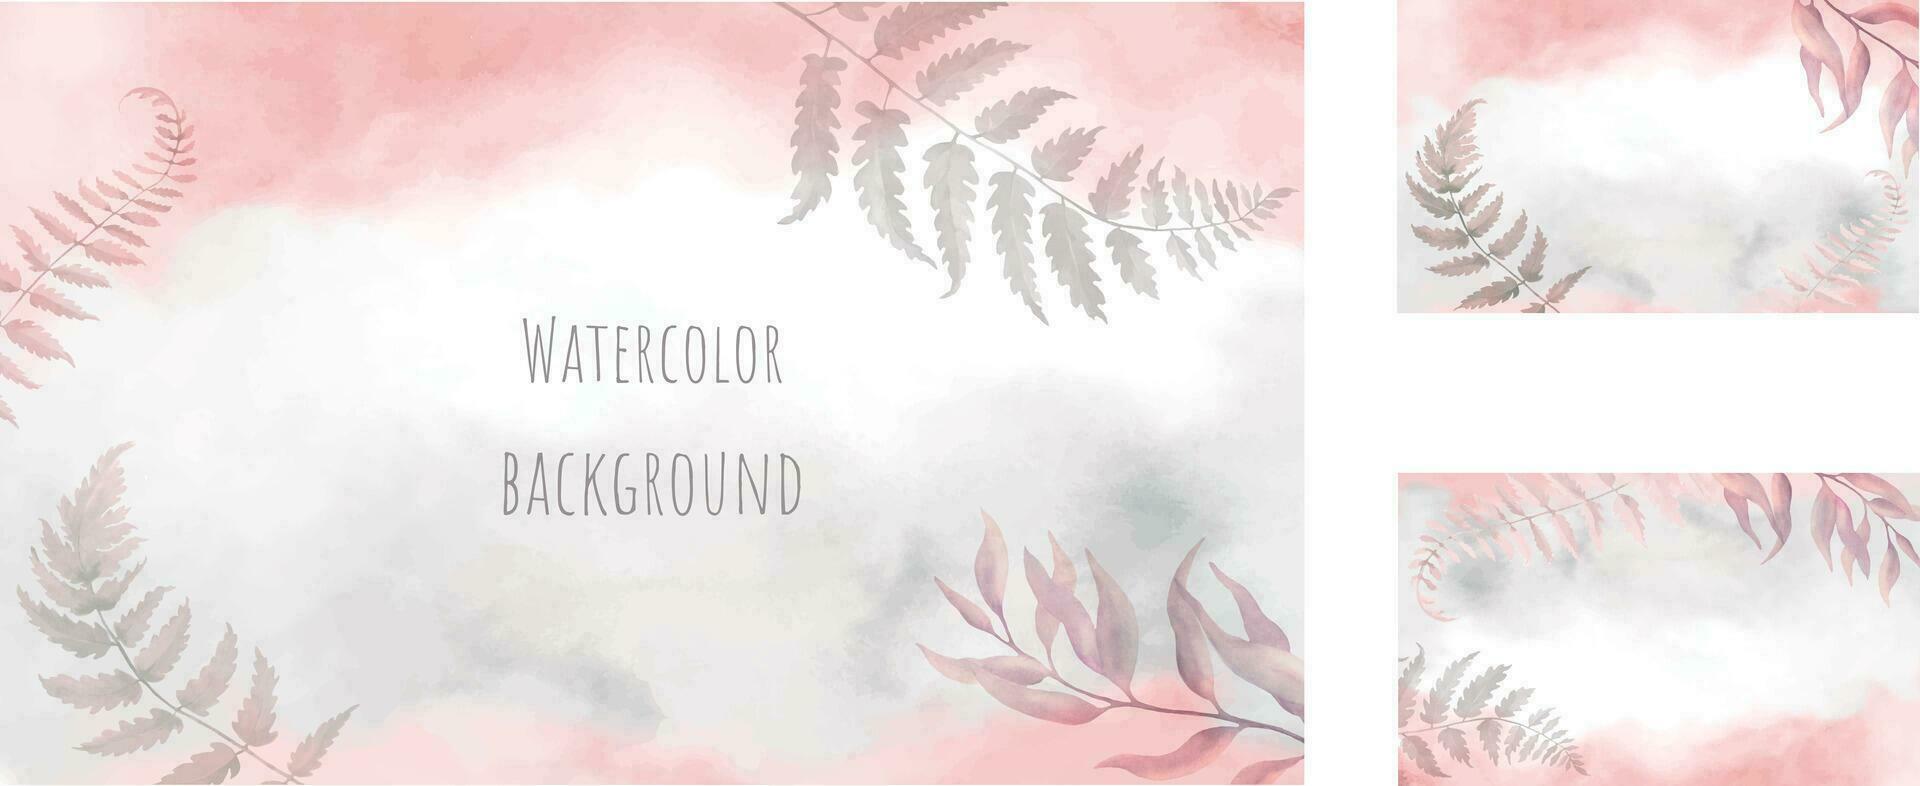 Watercolor background set. Hand drawn illustration with painted fern isolated on white background. vector